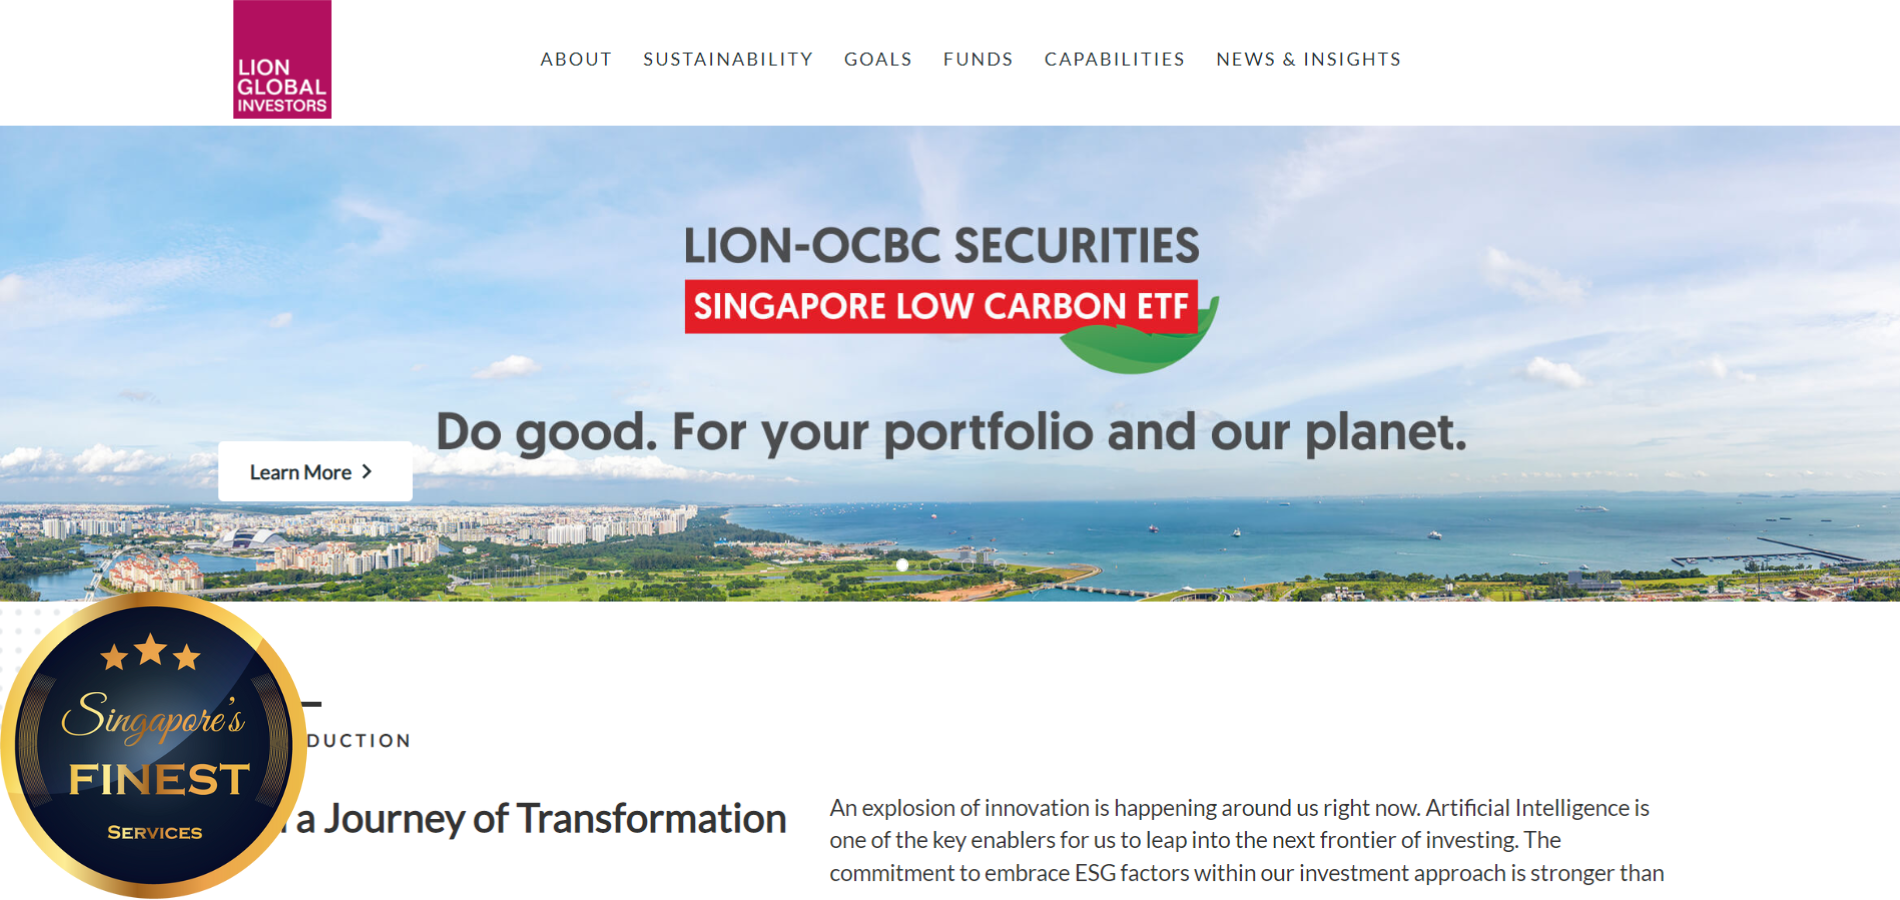 The Finest Asset Management Firms in Singapore